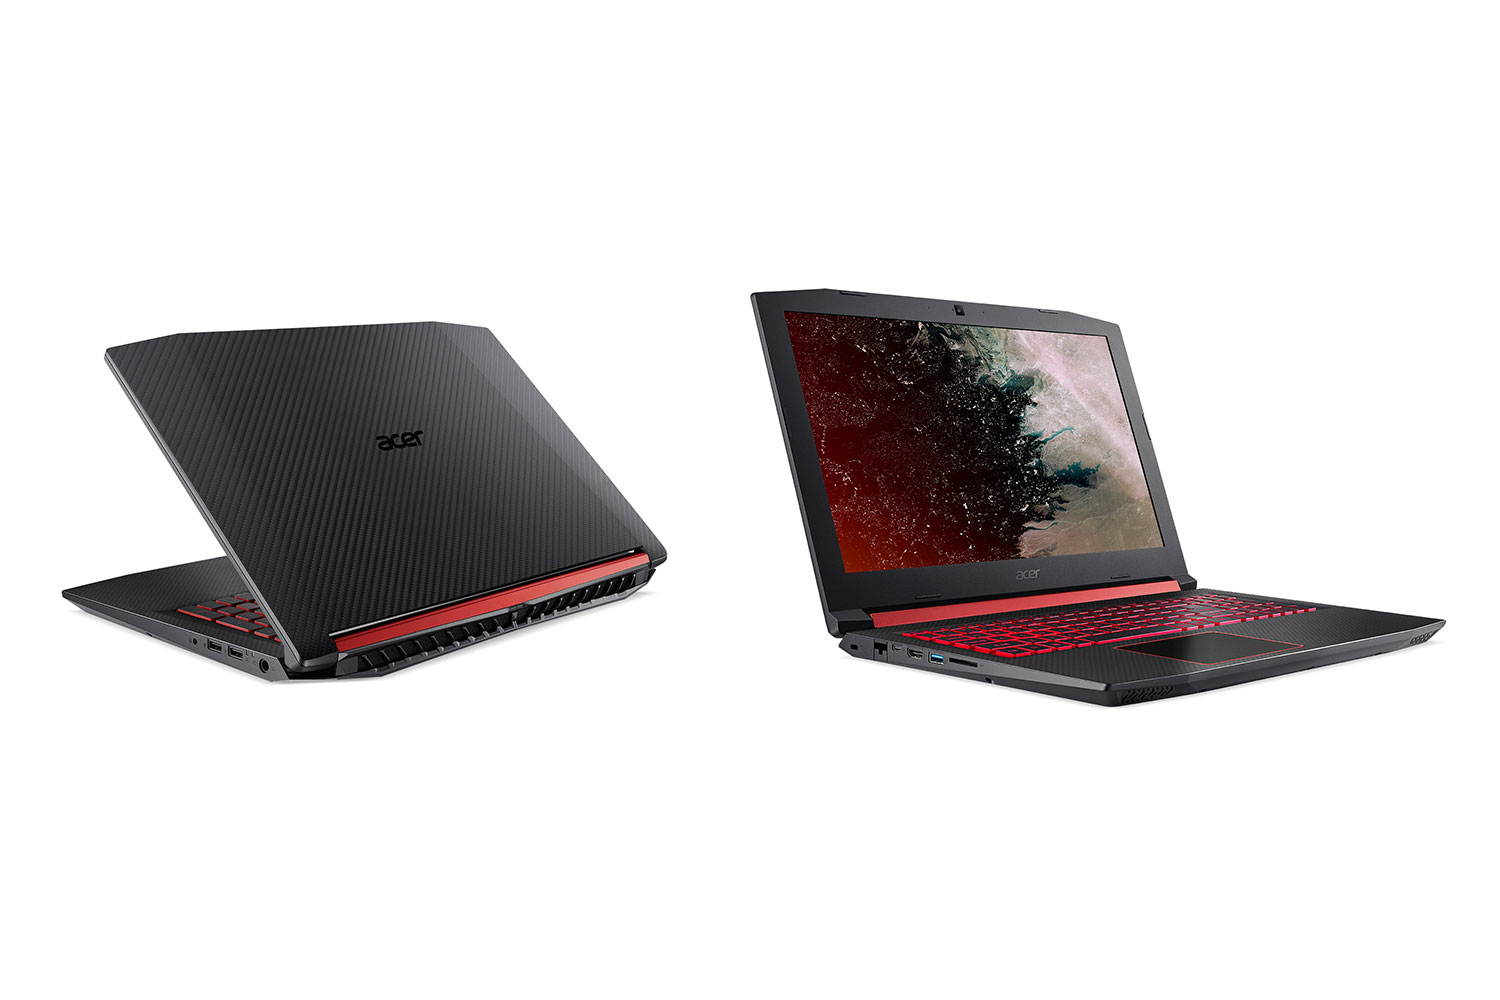 Acer Nitro 5 Officially Announced with Intel Coffee Lake CPU